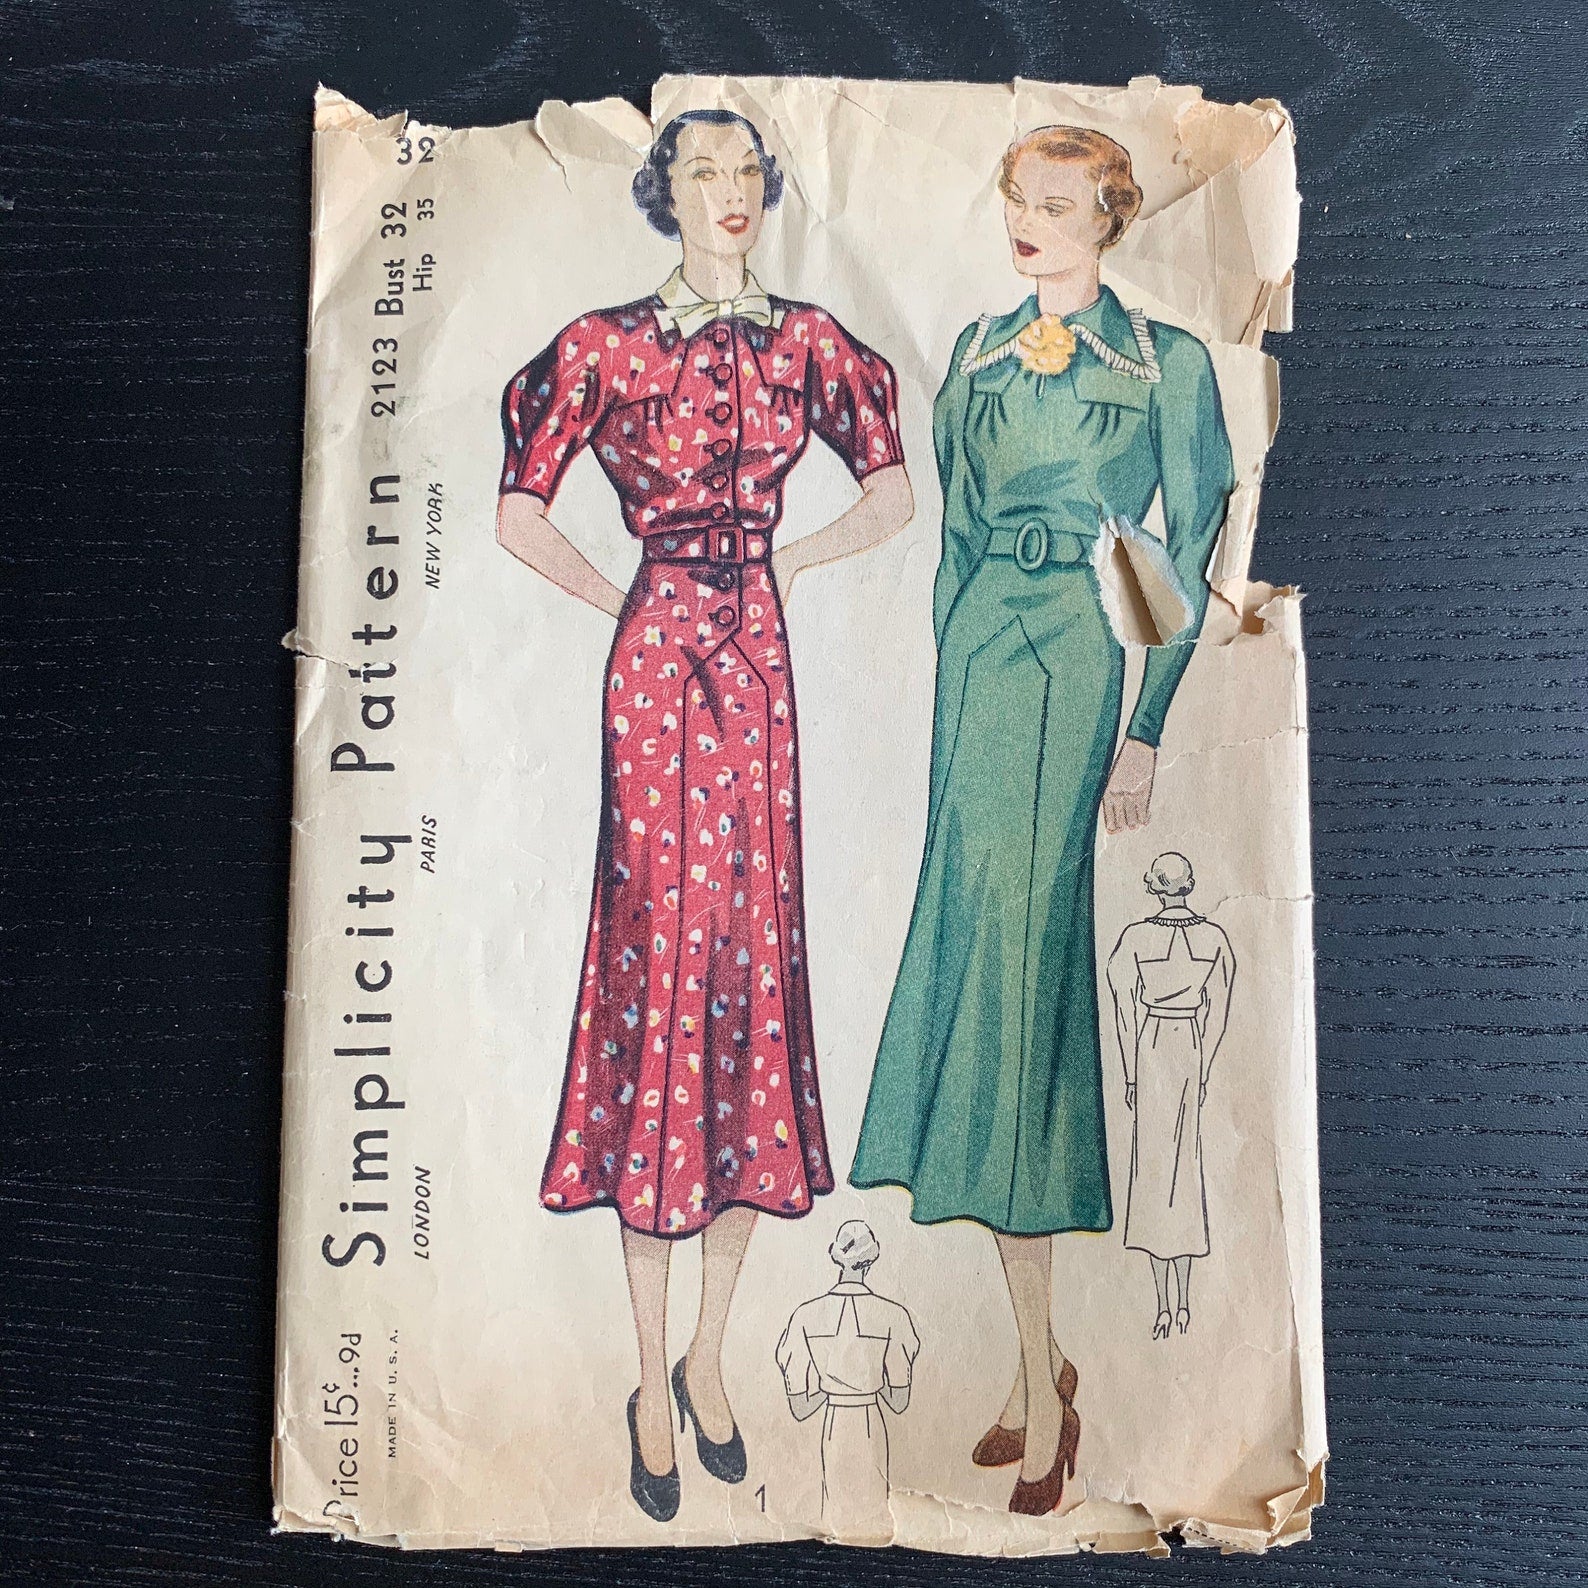 Vintage 1930s Women's Dress Sewing Pattern, Simplicity 2123, Bust 32,  Incomplete